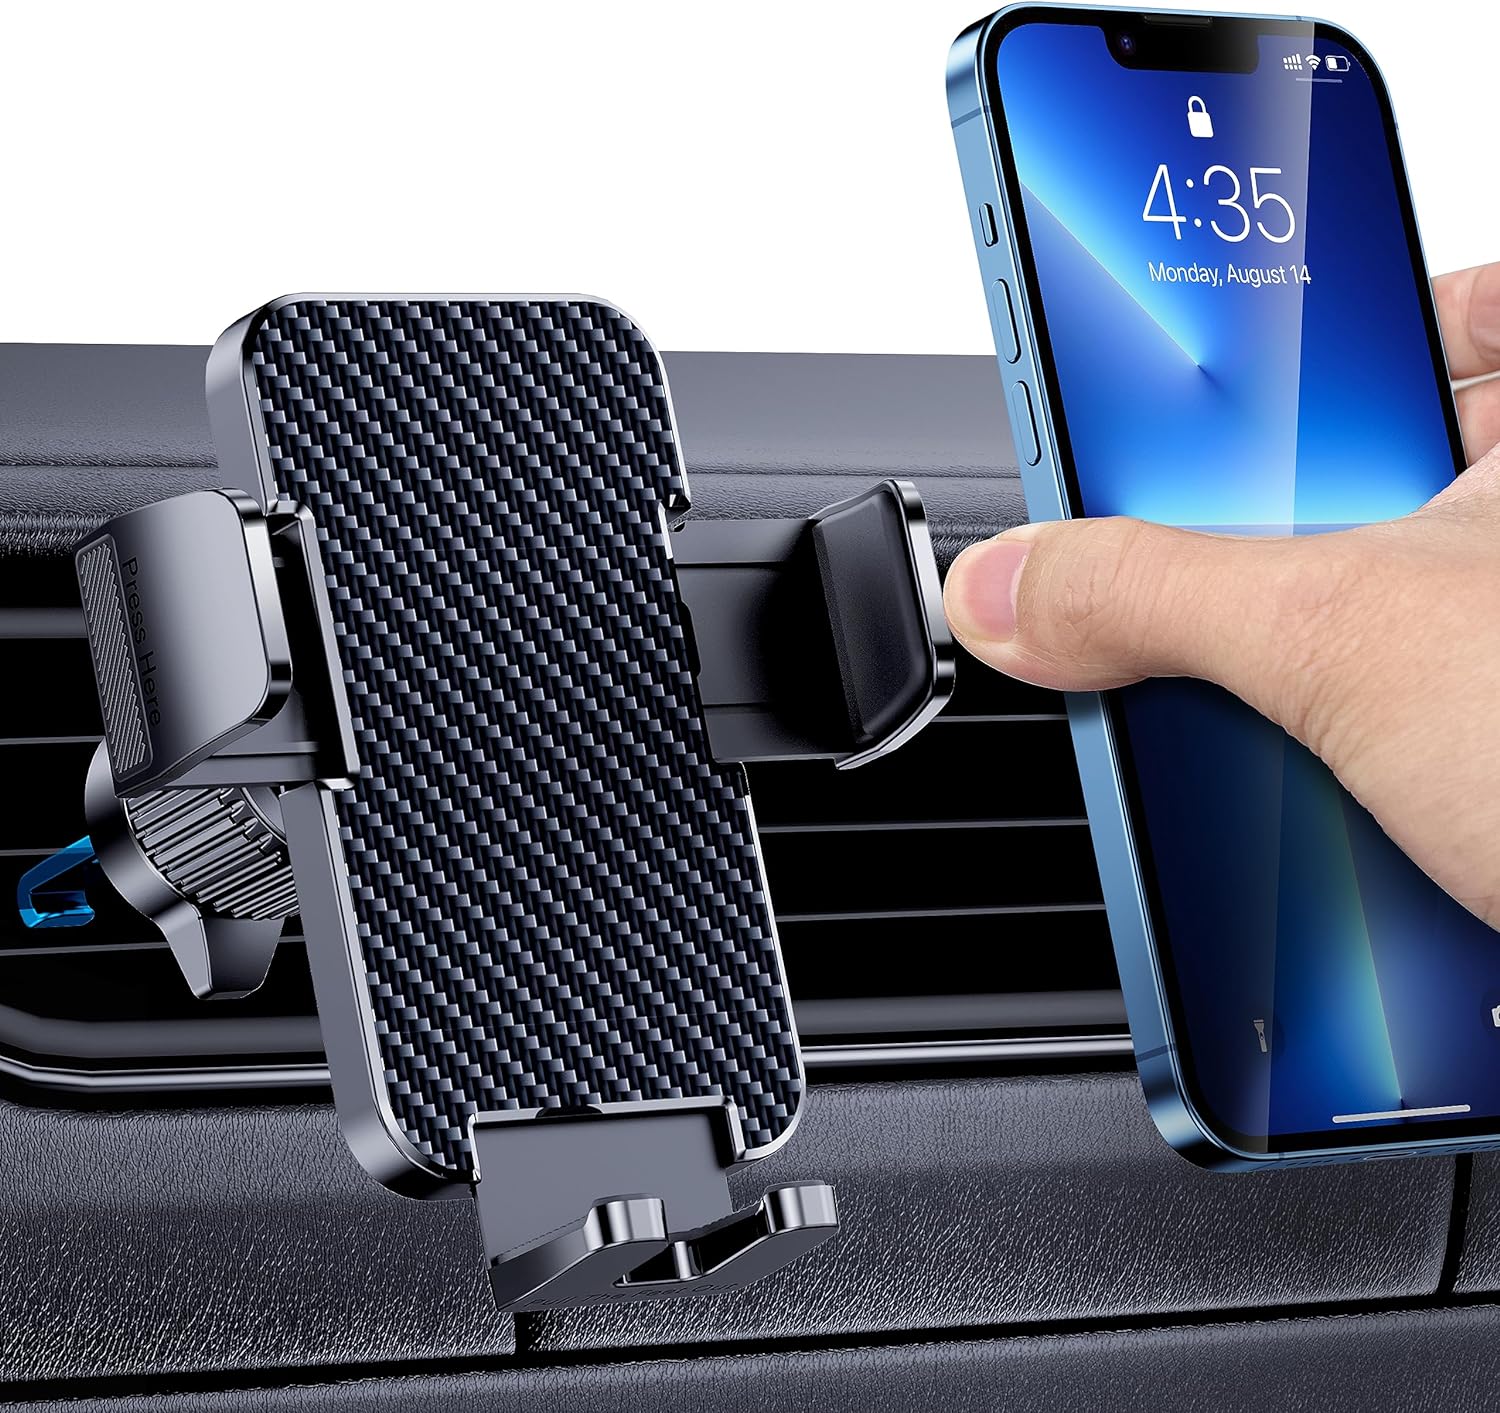 Phone Mount for Car Phone Holder [Thick Cases Friendly] Cell Phone Holder Hands Free Phone Stand for Car Vent Phone Mount Fit iPhone Android Smartphone Cell Phone Automobile Cradles Universal